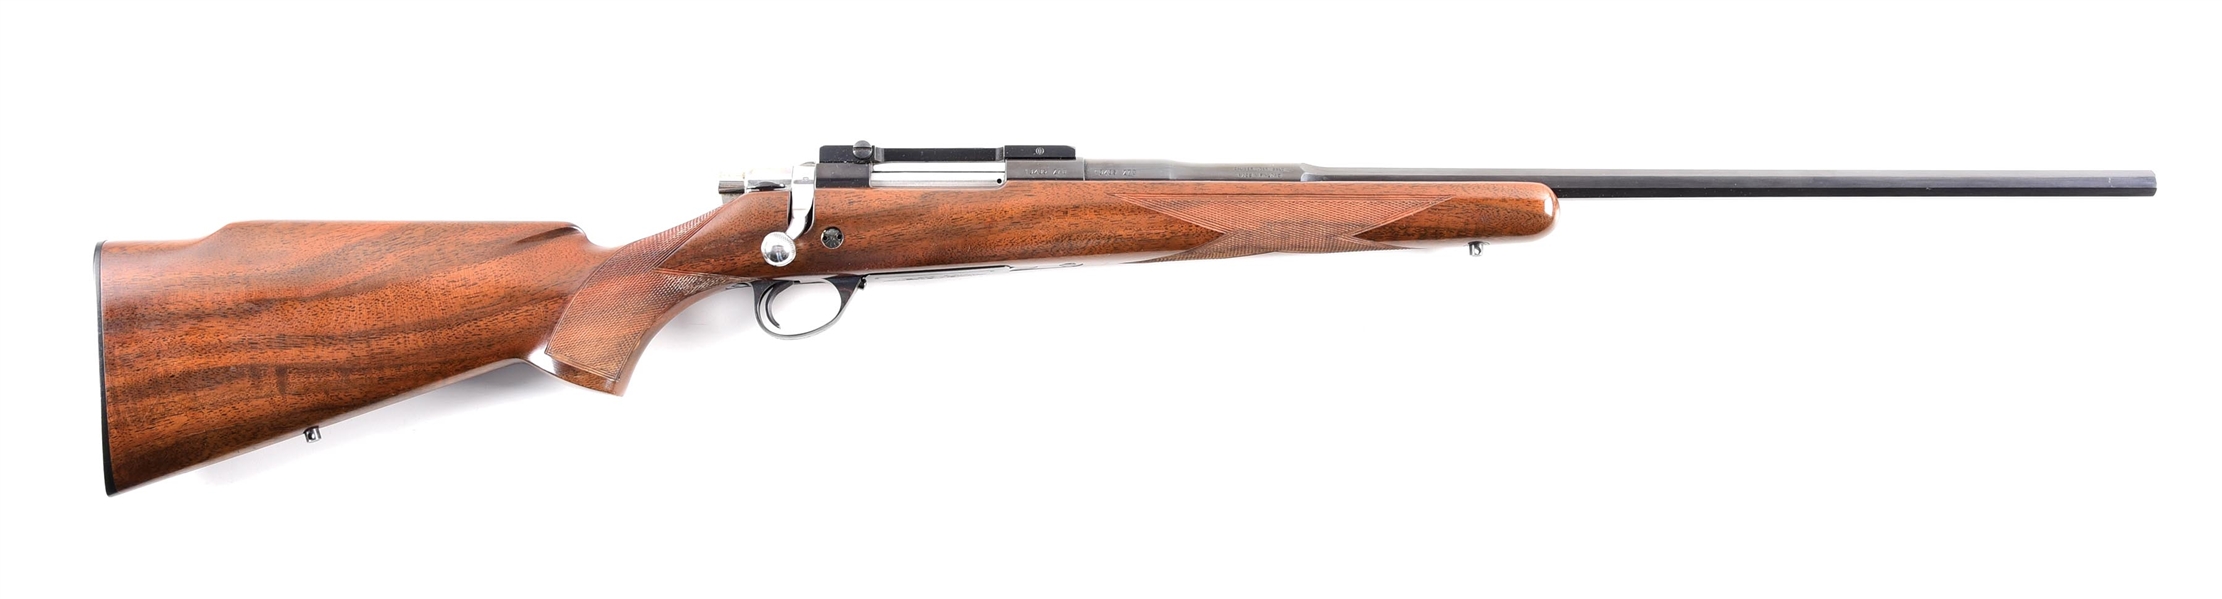 (C) BROWNING FINNISH HI POWER BOLT ACTION RIFLE.